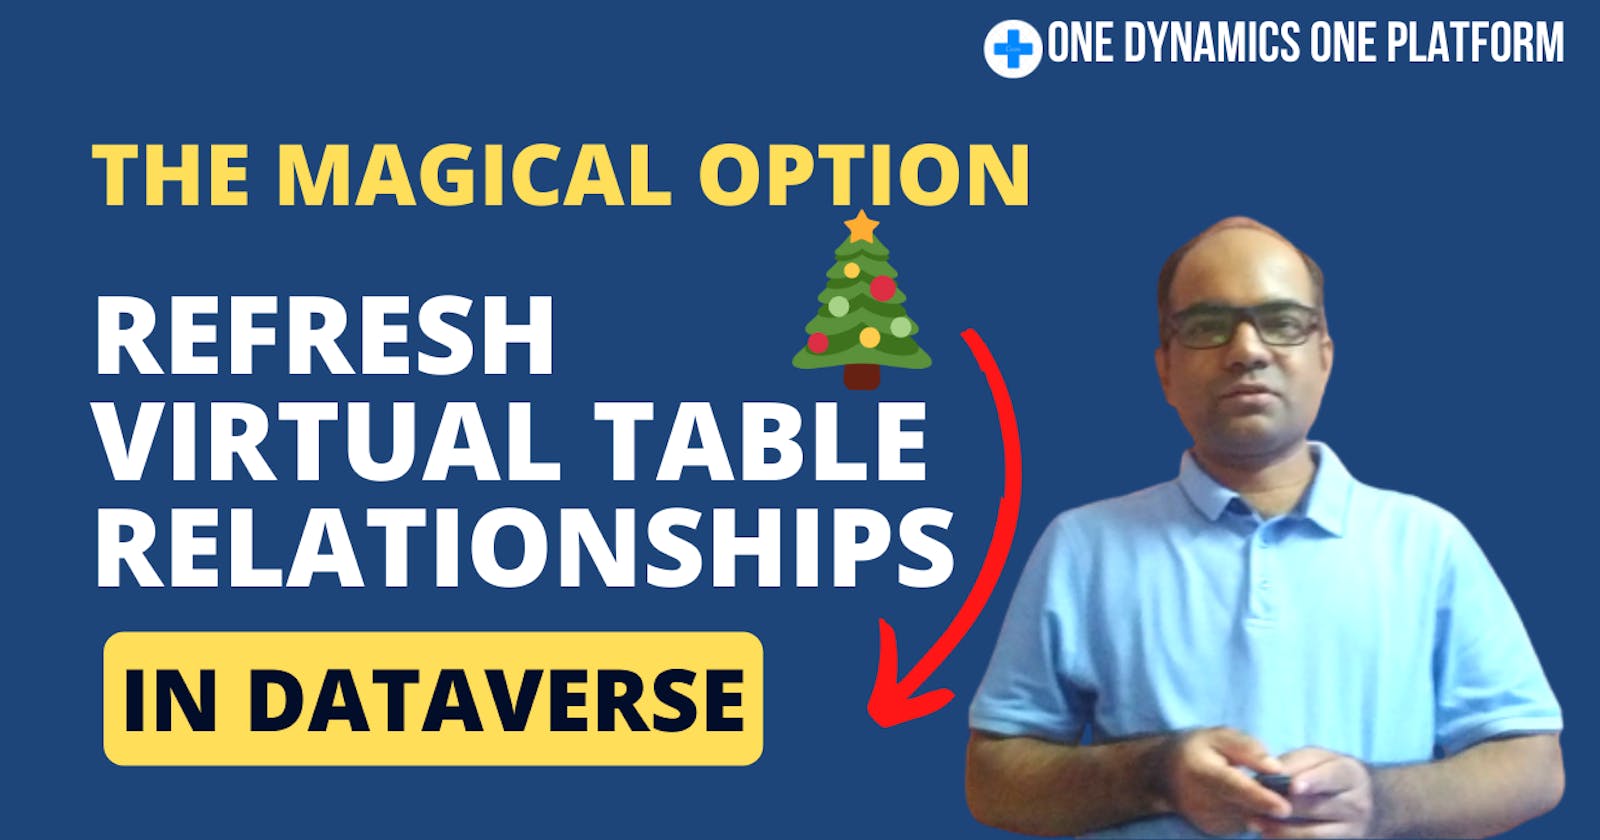 The magical option to refresh virtual table relationships in Dataverse